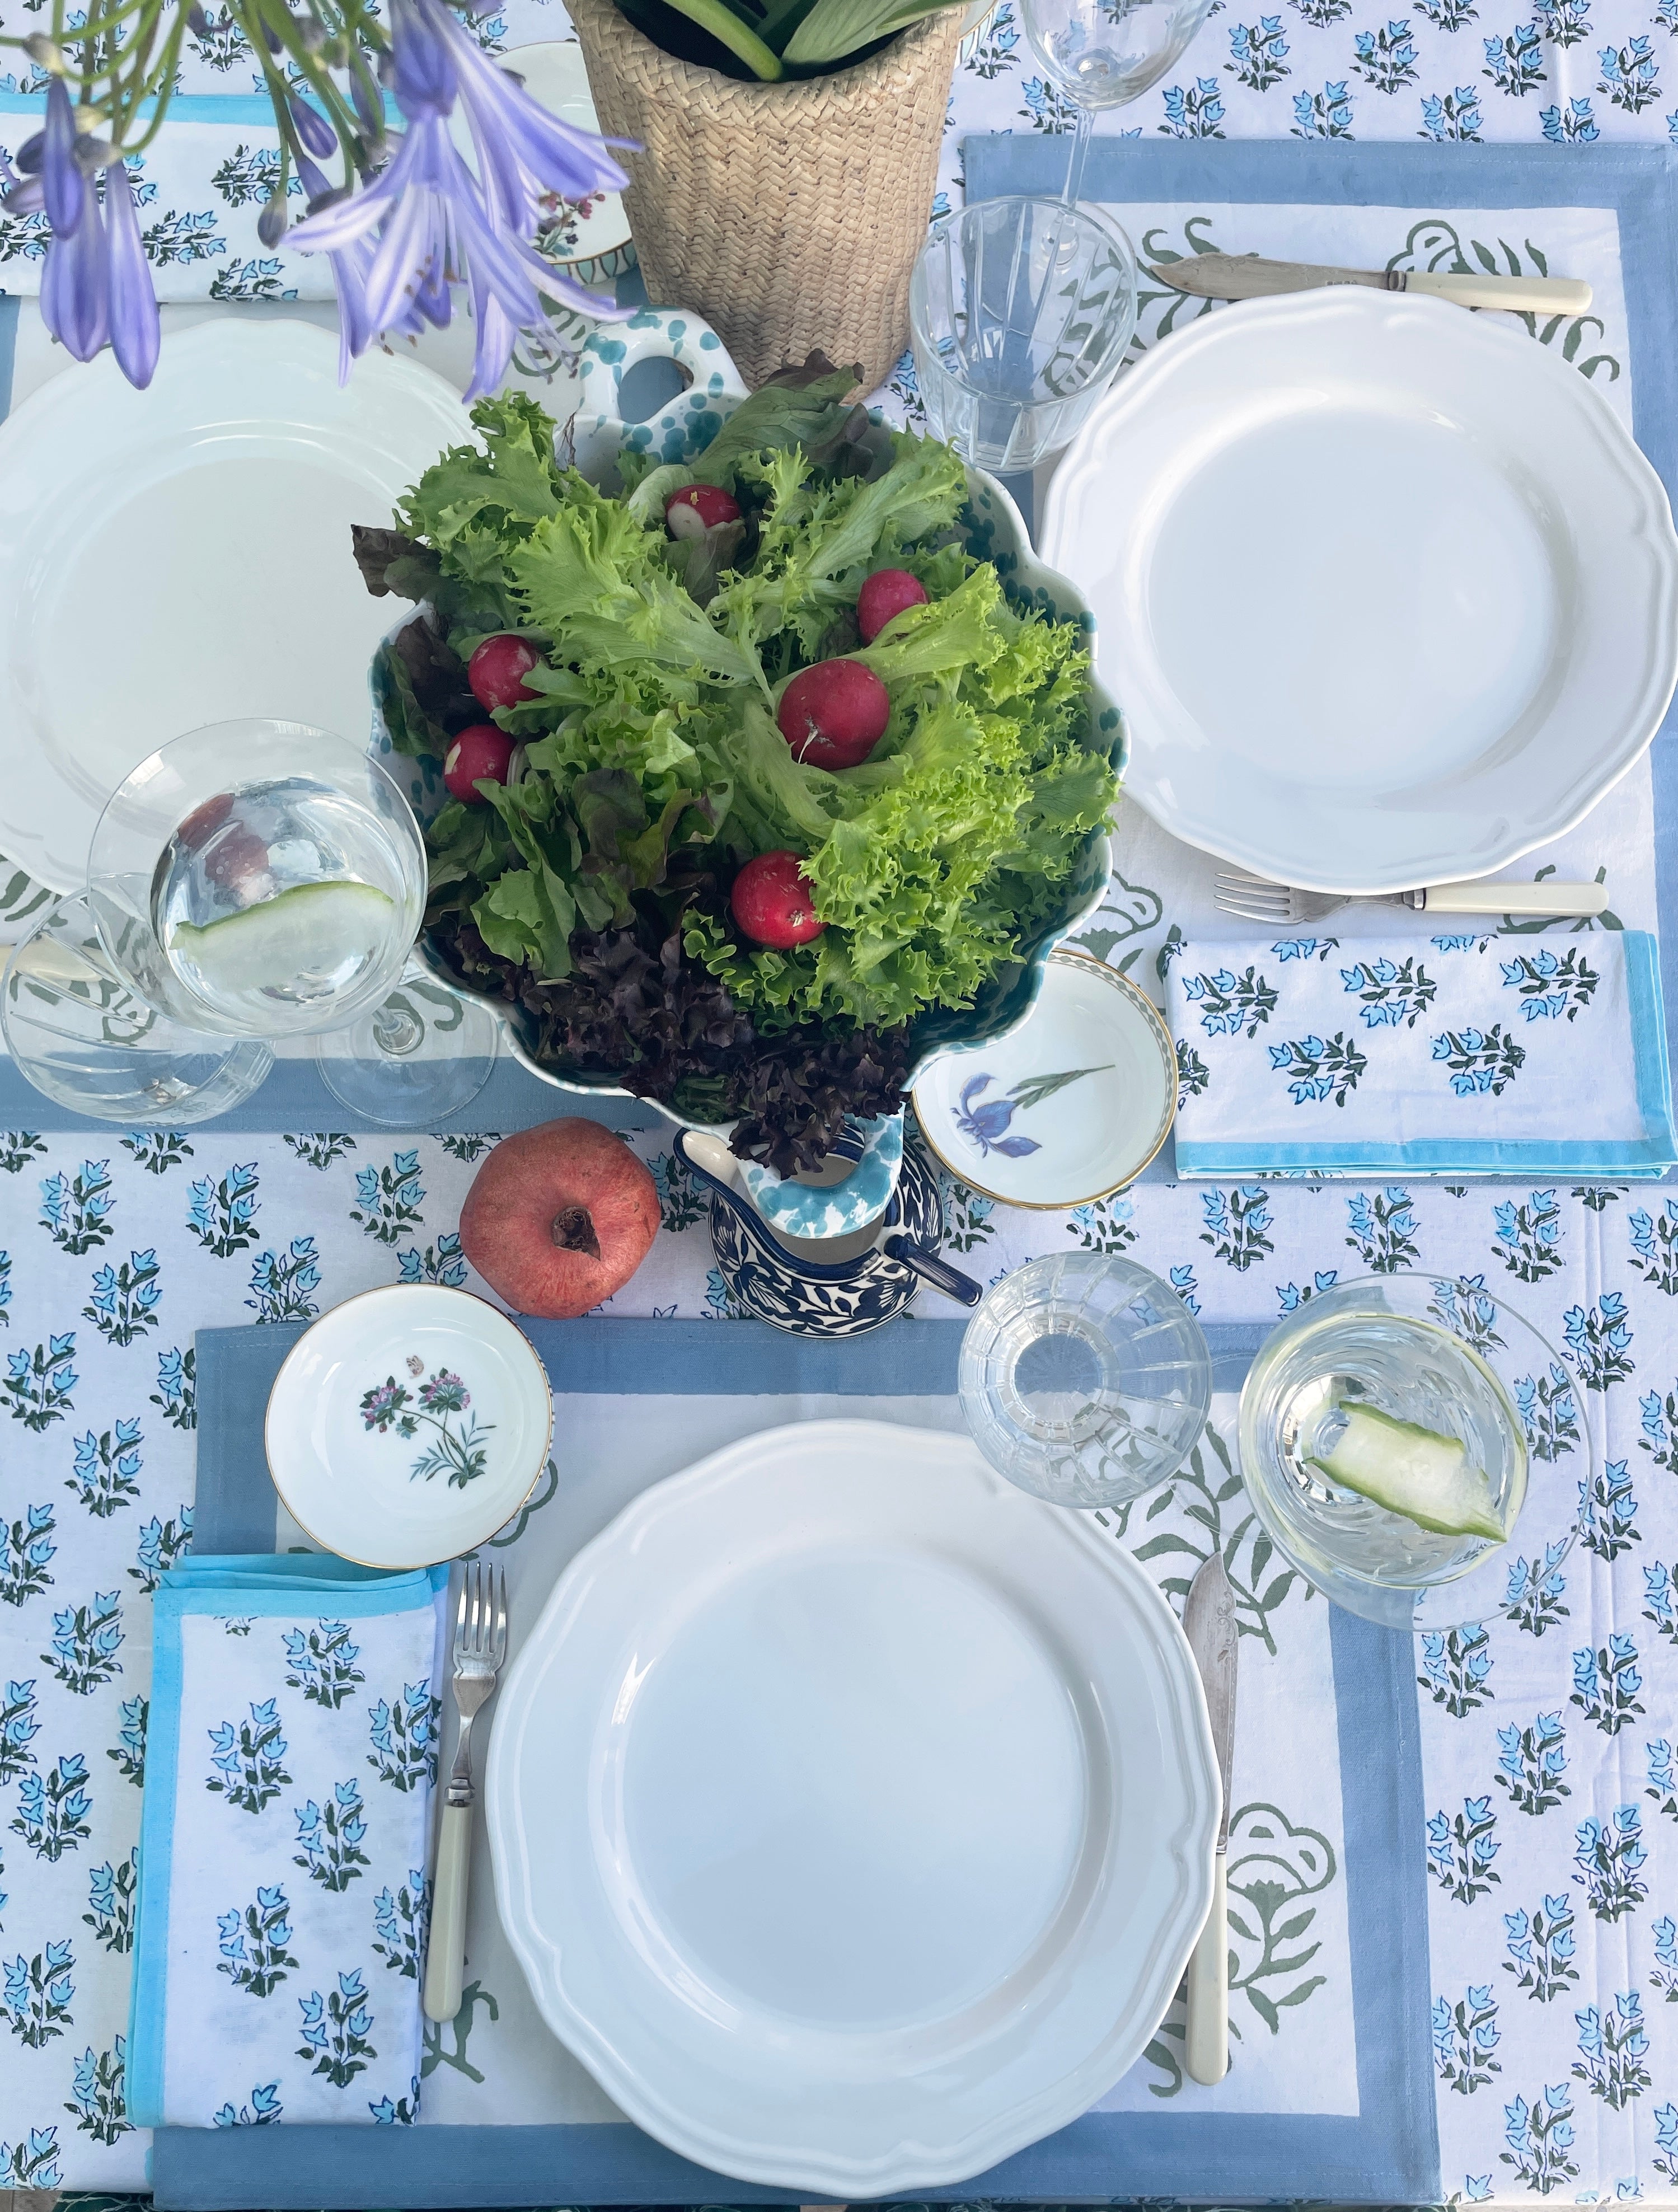 HAND BLOCK PRINTED BLUE FLOWER TABLE CLOTH The Charpoy